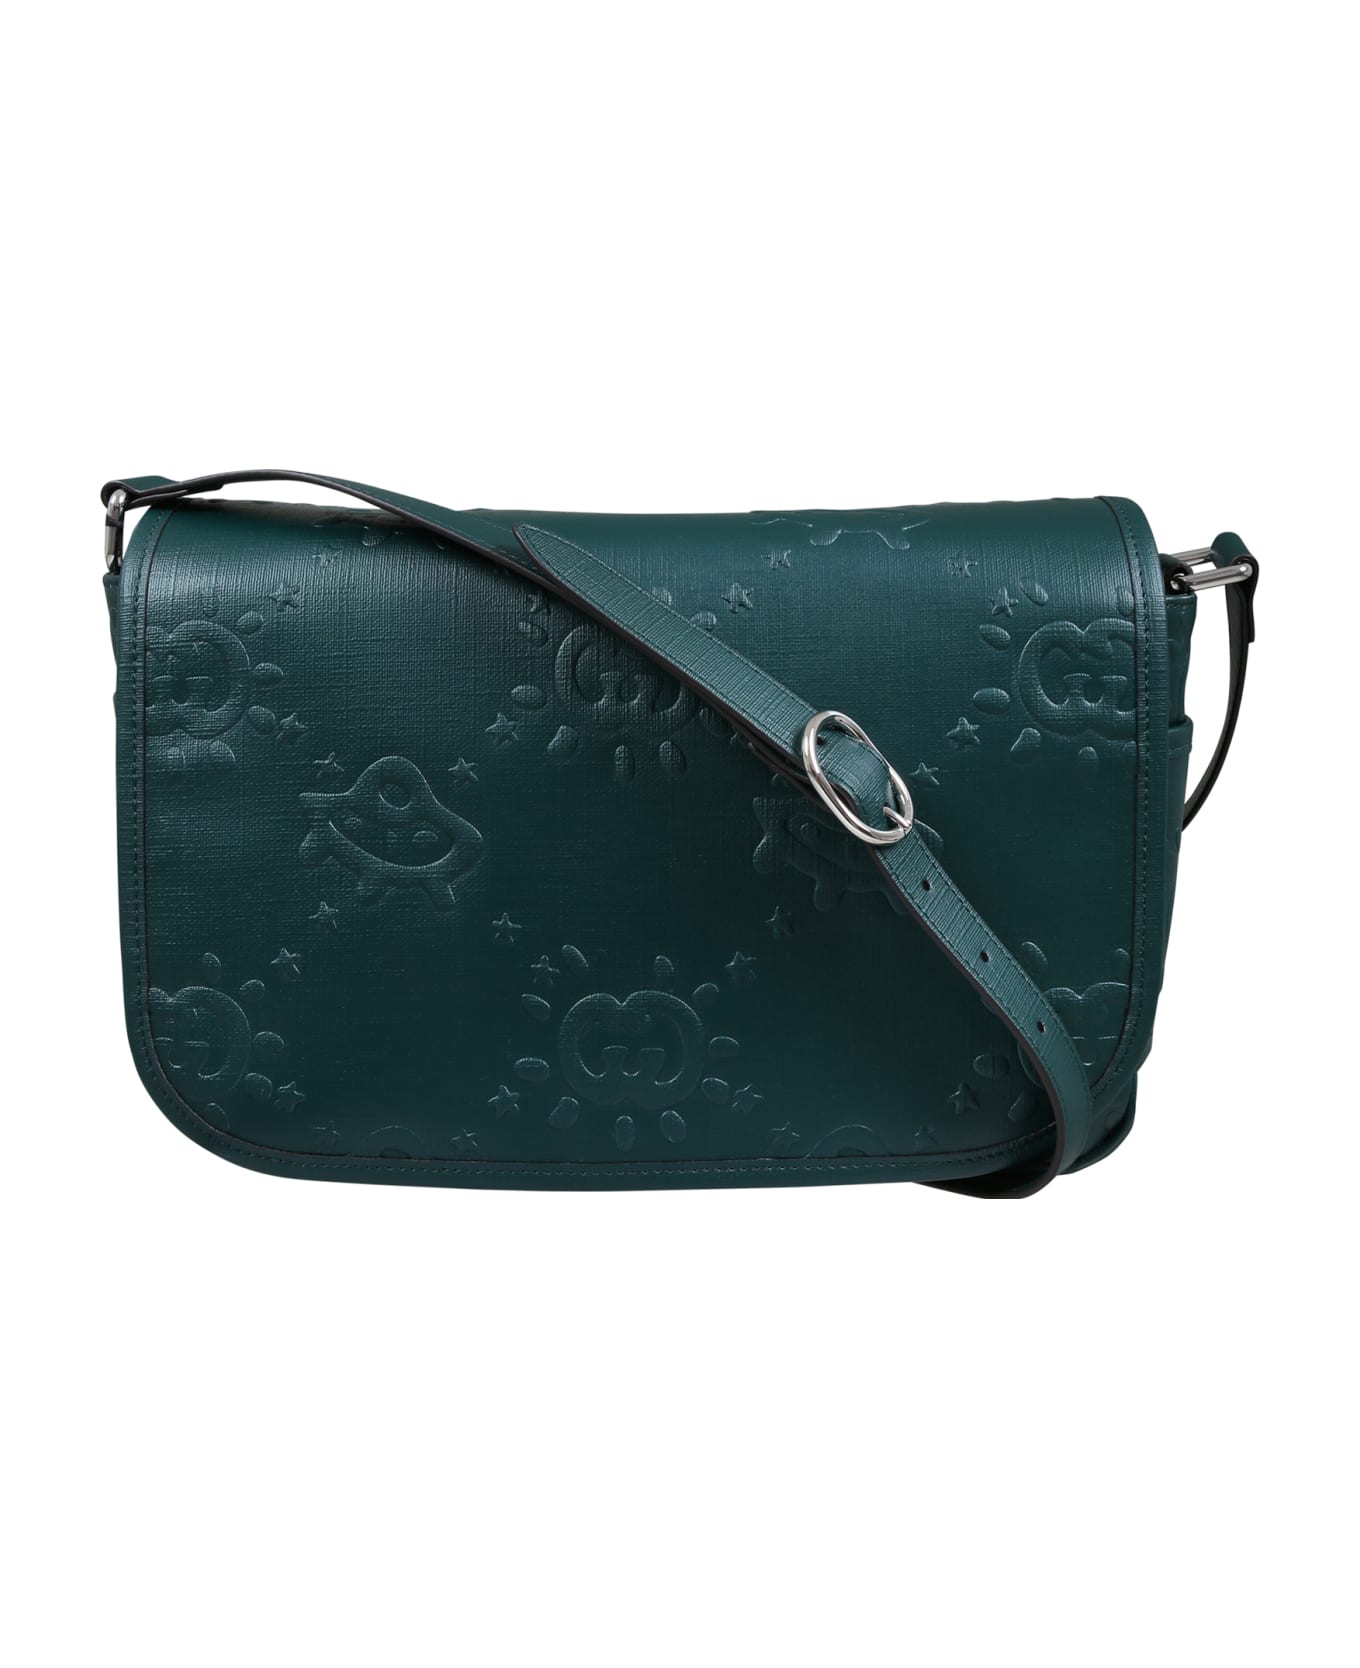 Gucci Green Bag For Girl With Gg Cross - Green